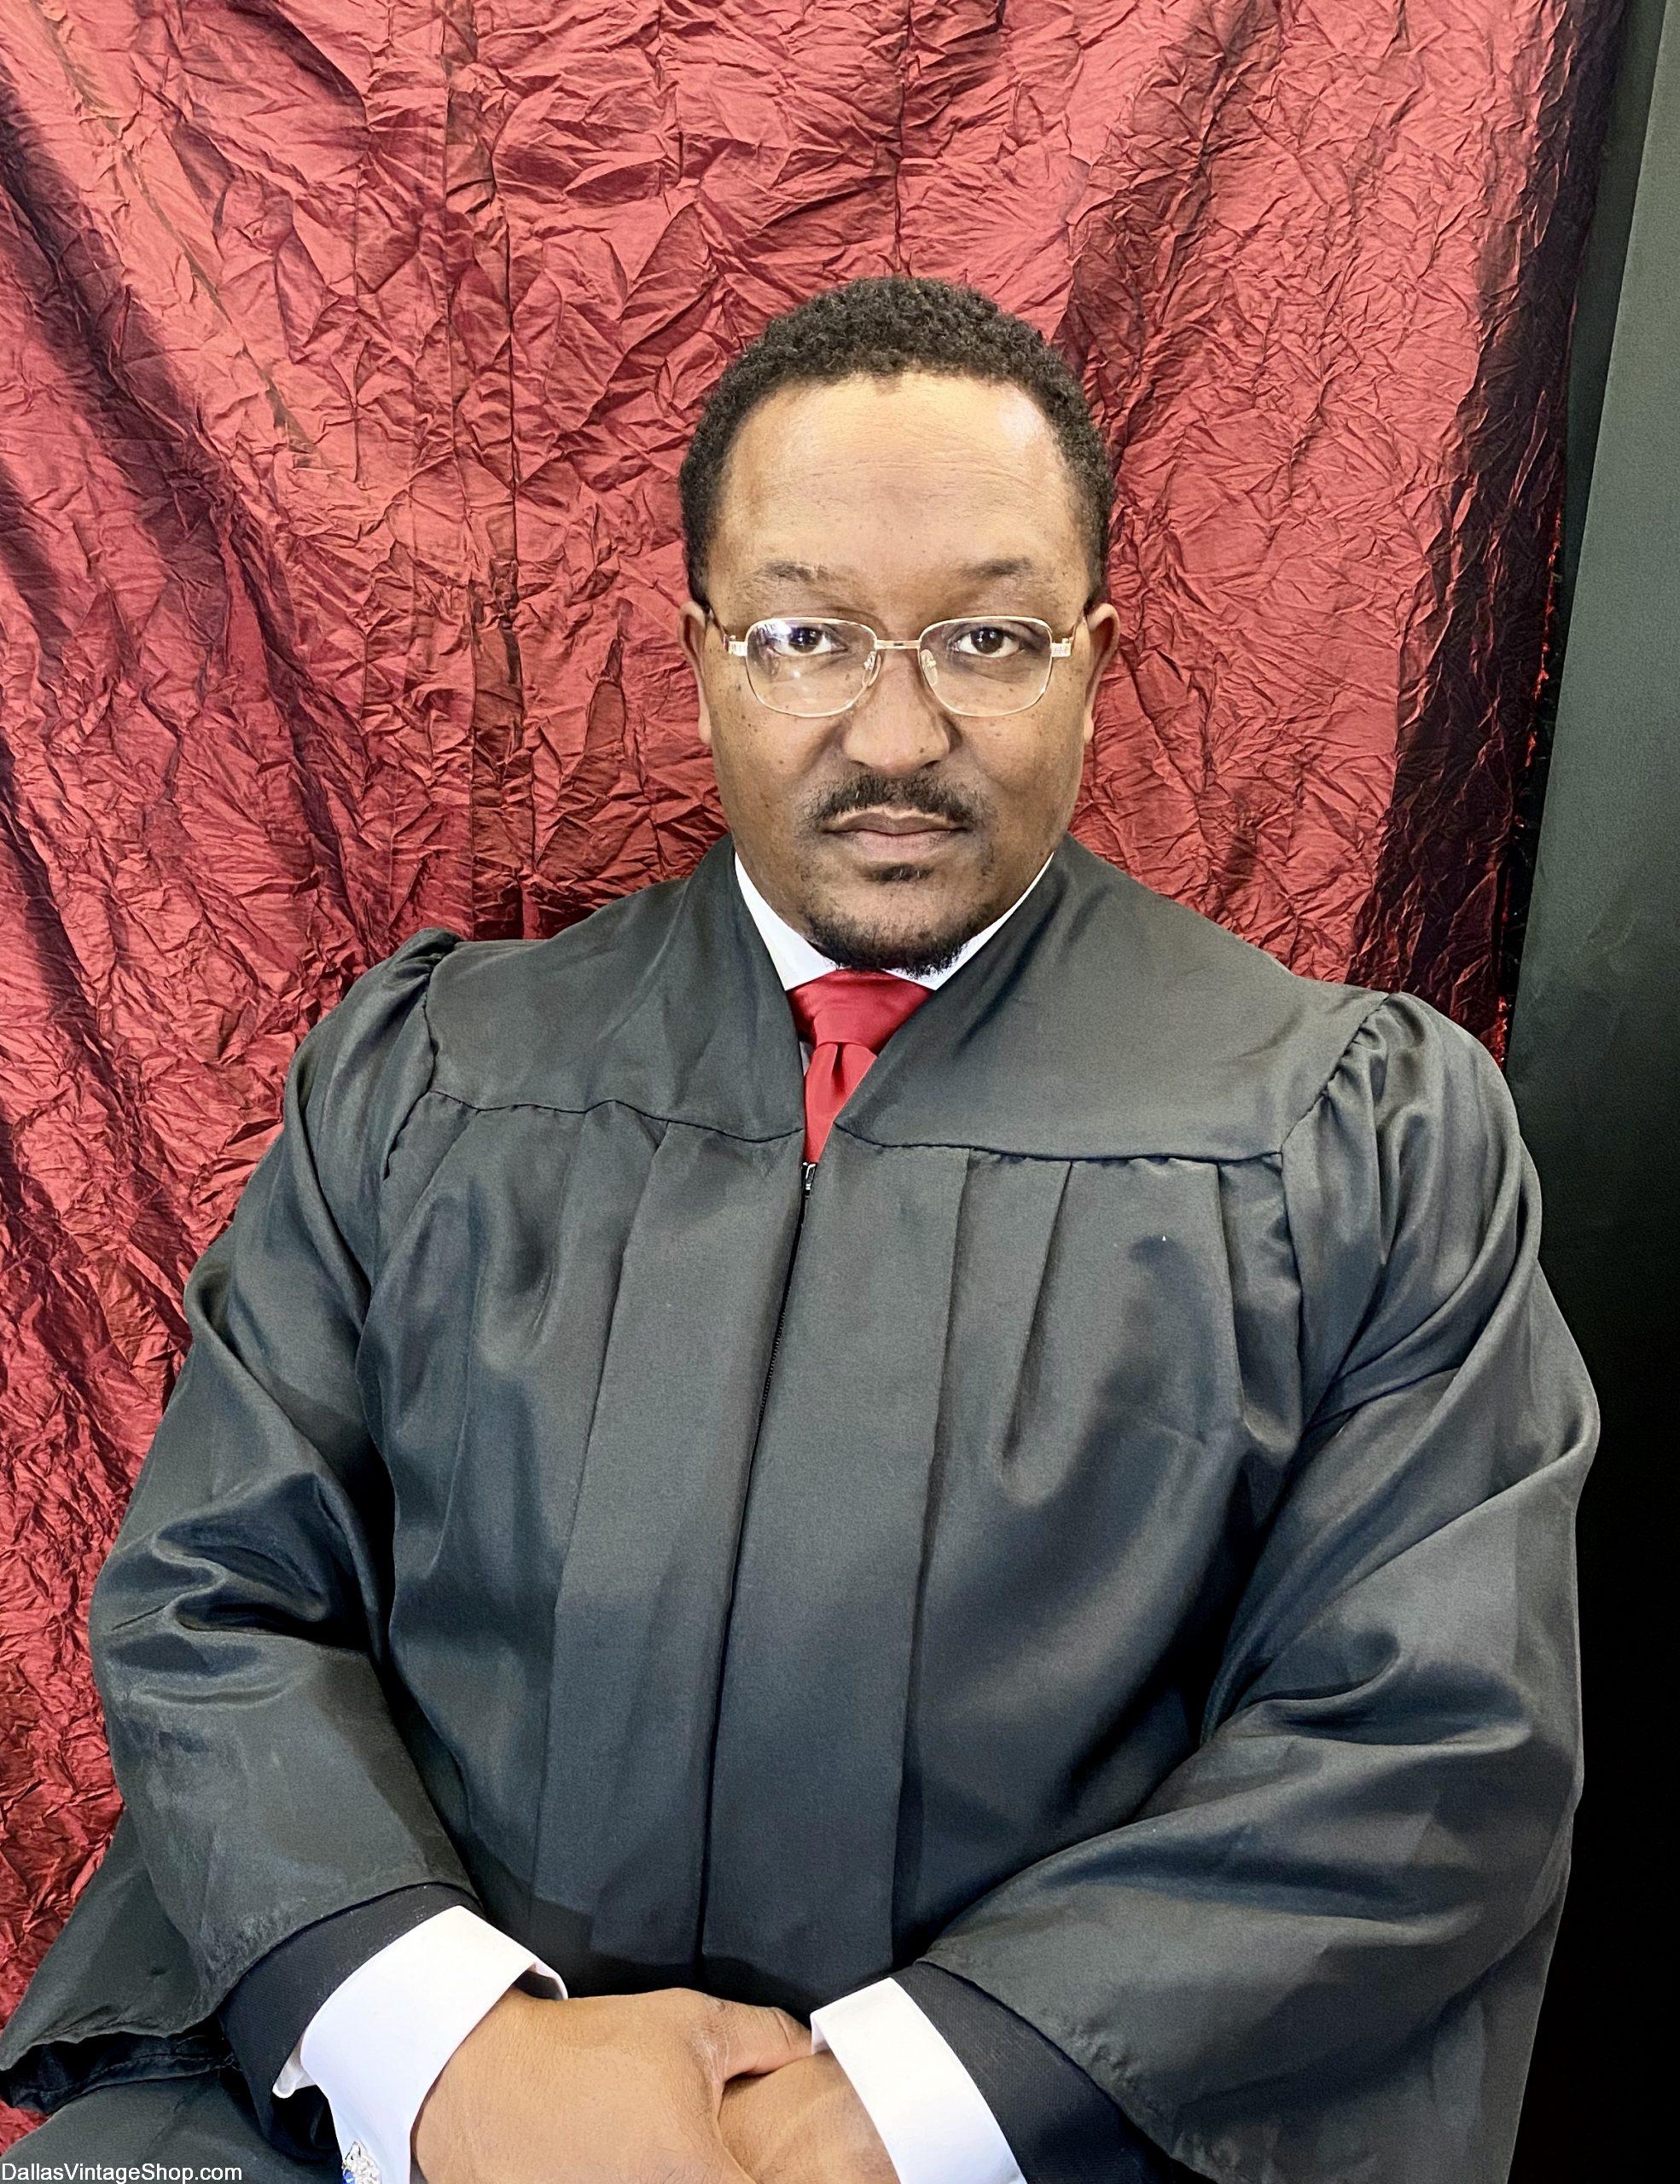 Black History Month Clarence Thomas, Black Historical Americans, Famous Black Americans, Important Black History People, Costumes Period Clothing in stock at Dallas Vintage Shop.